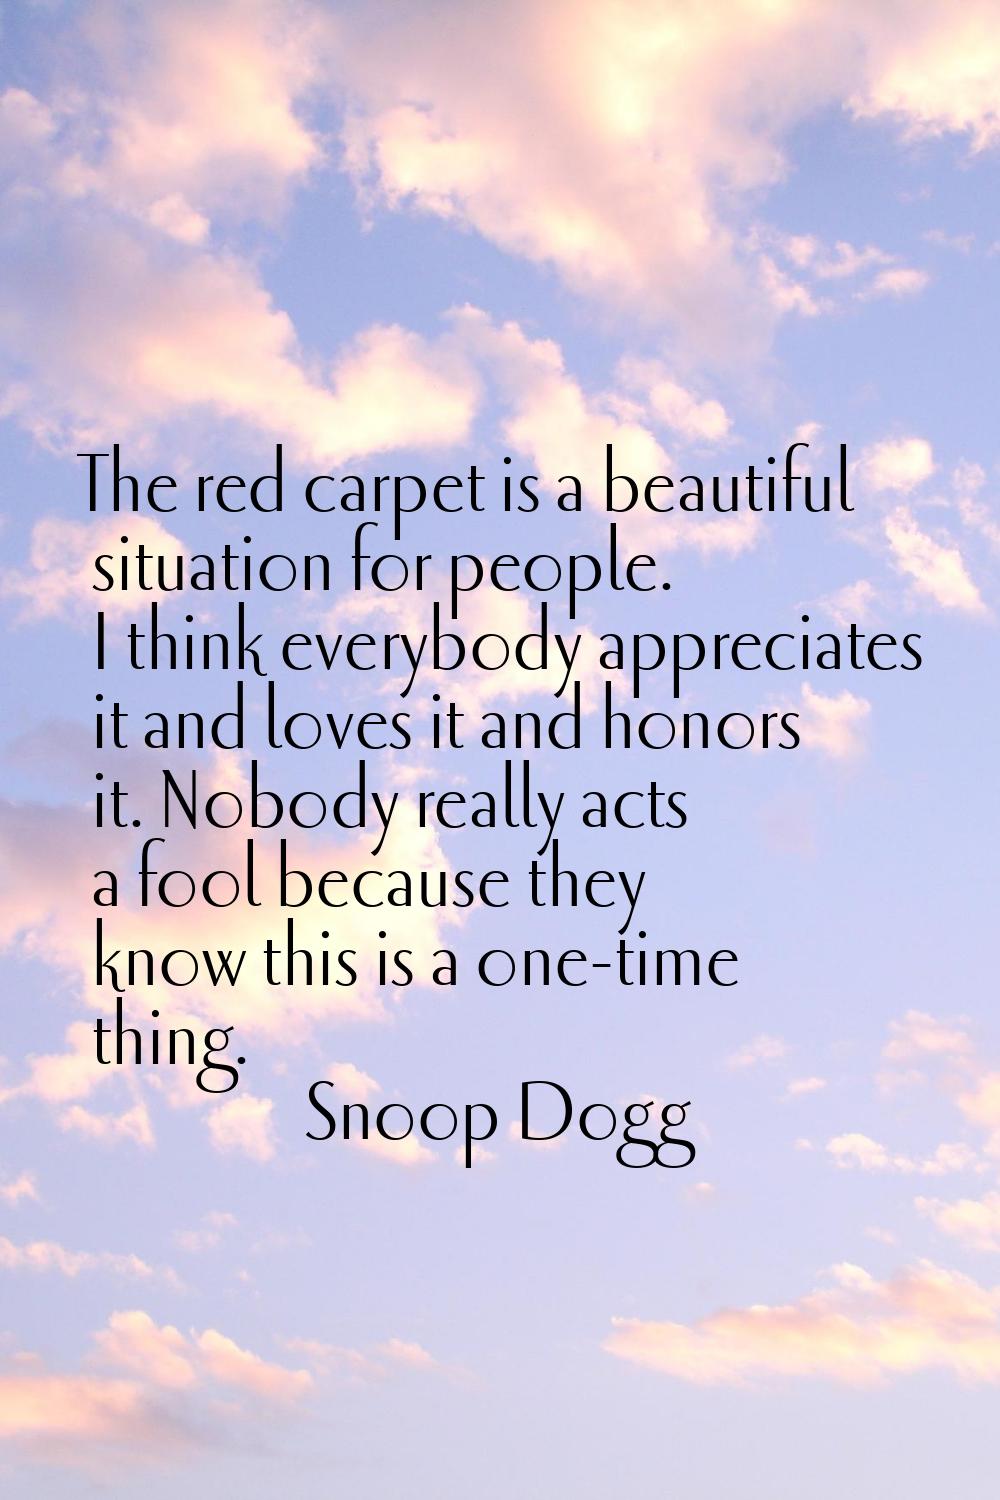 The red carpet is a beautiful situation for people. I think everybody appreciates it and loves it a